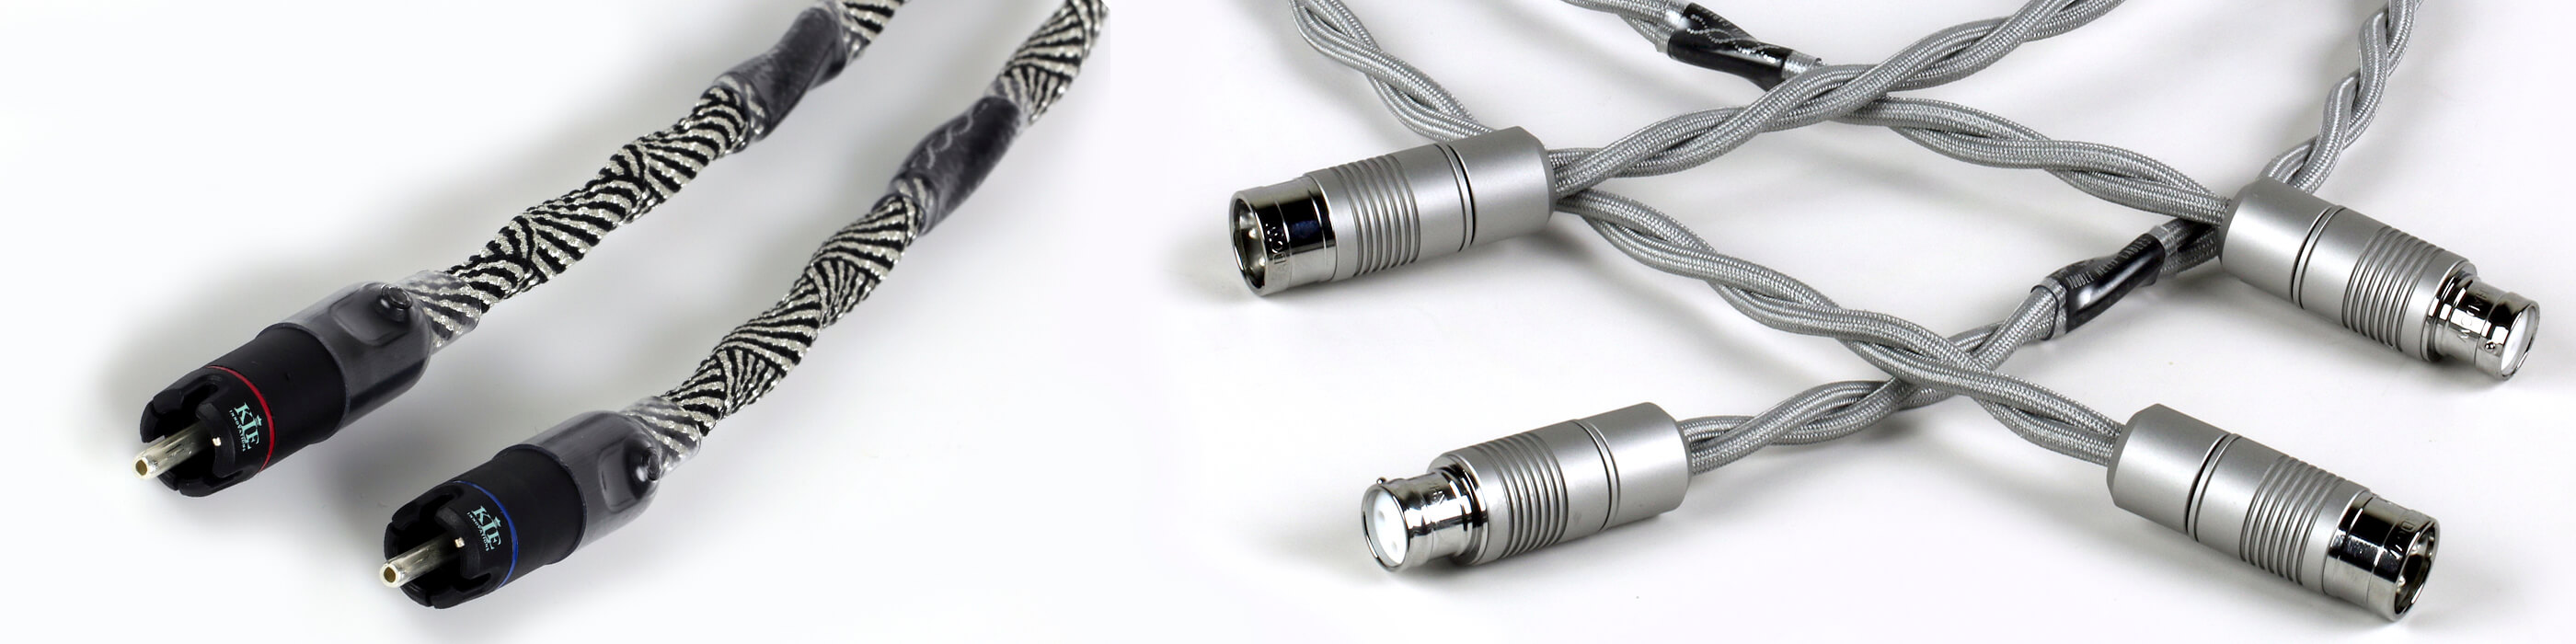 dhc-occ-litz-headphone-cable-eidolic-spore-prion-xlr-rca-interconnects